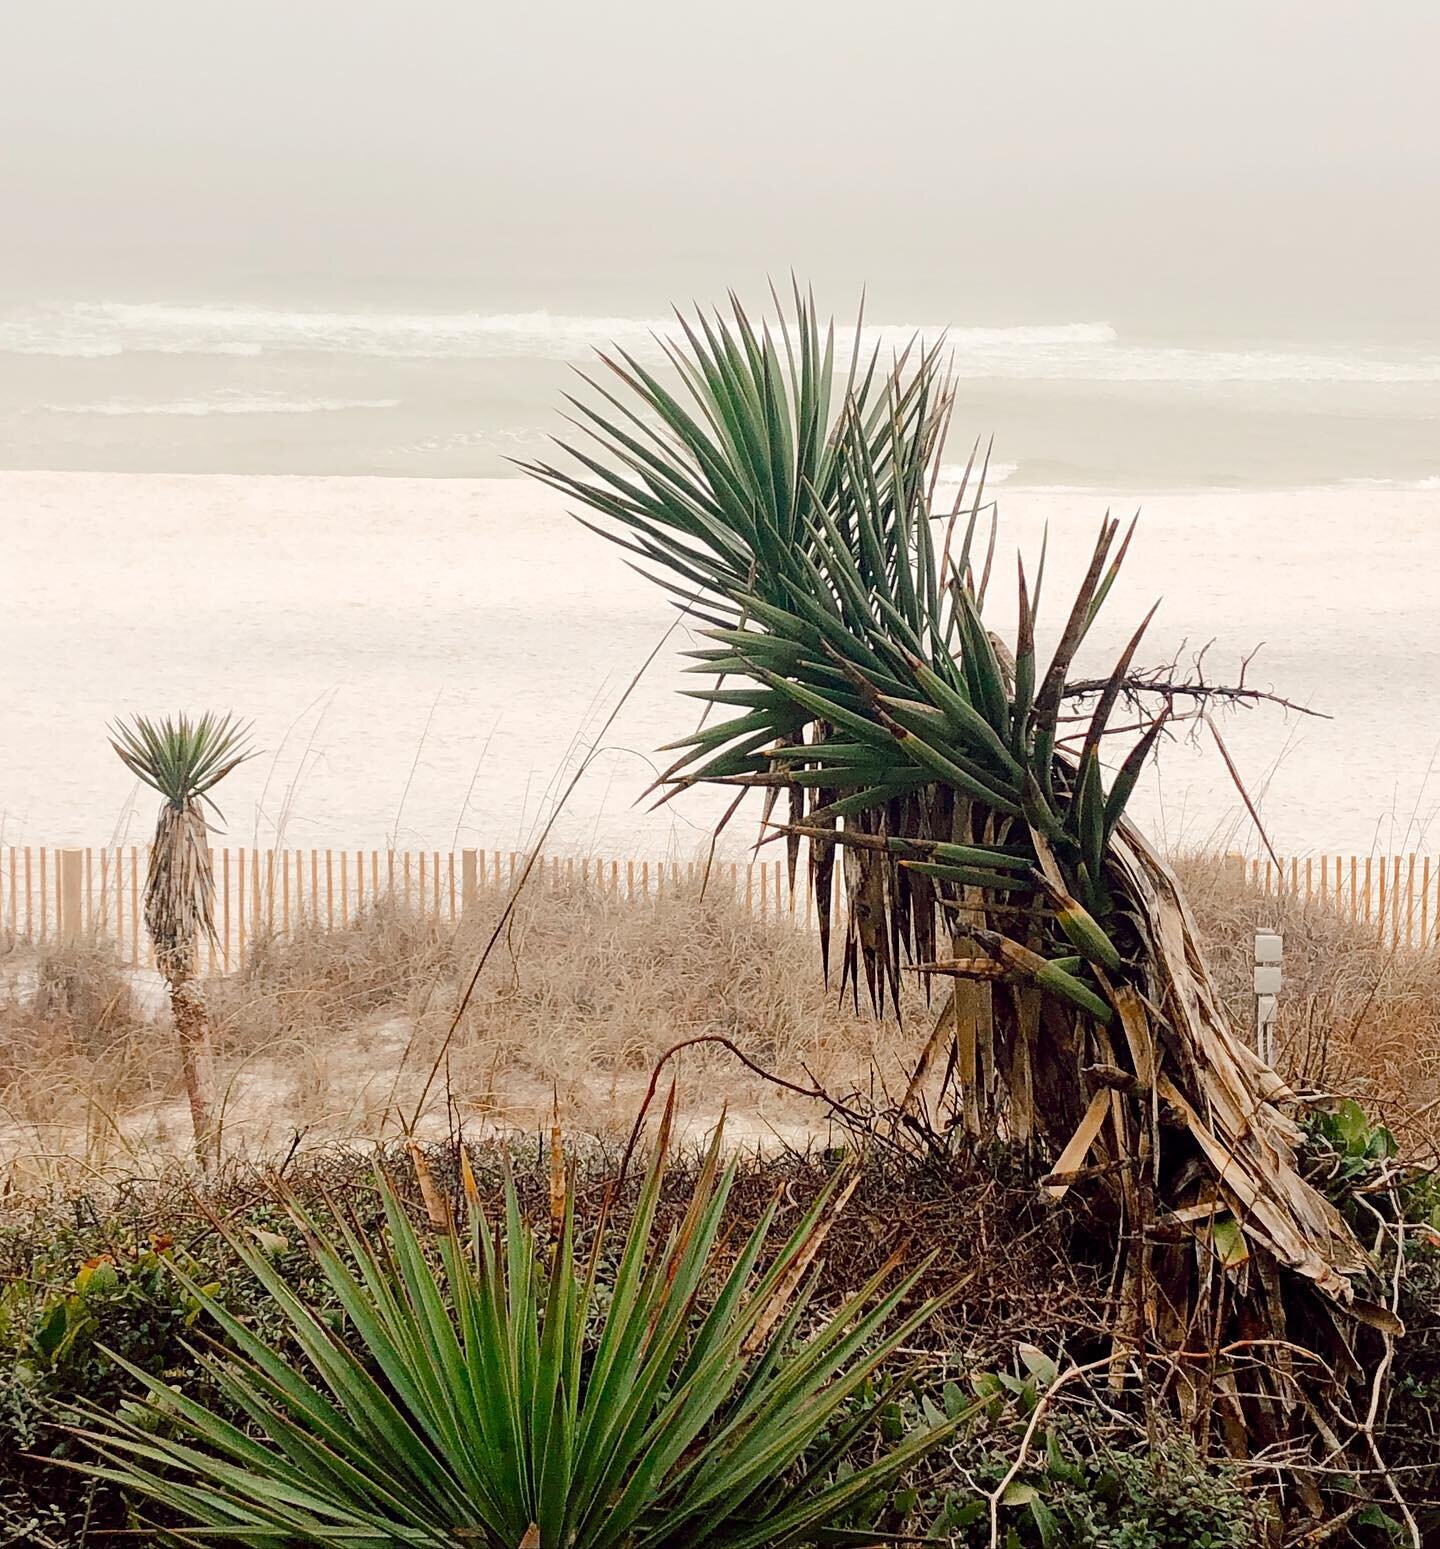 Dunes protect our coastline. Enjoy their beauty and please only walk in designated areas.🌴